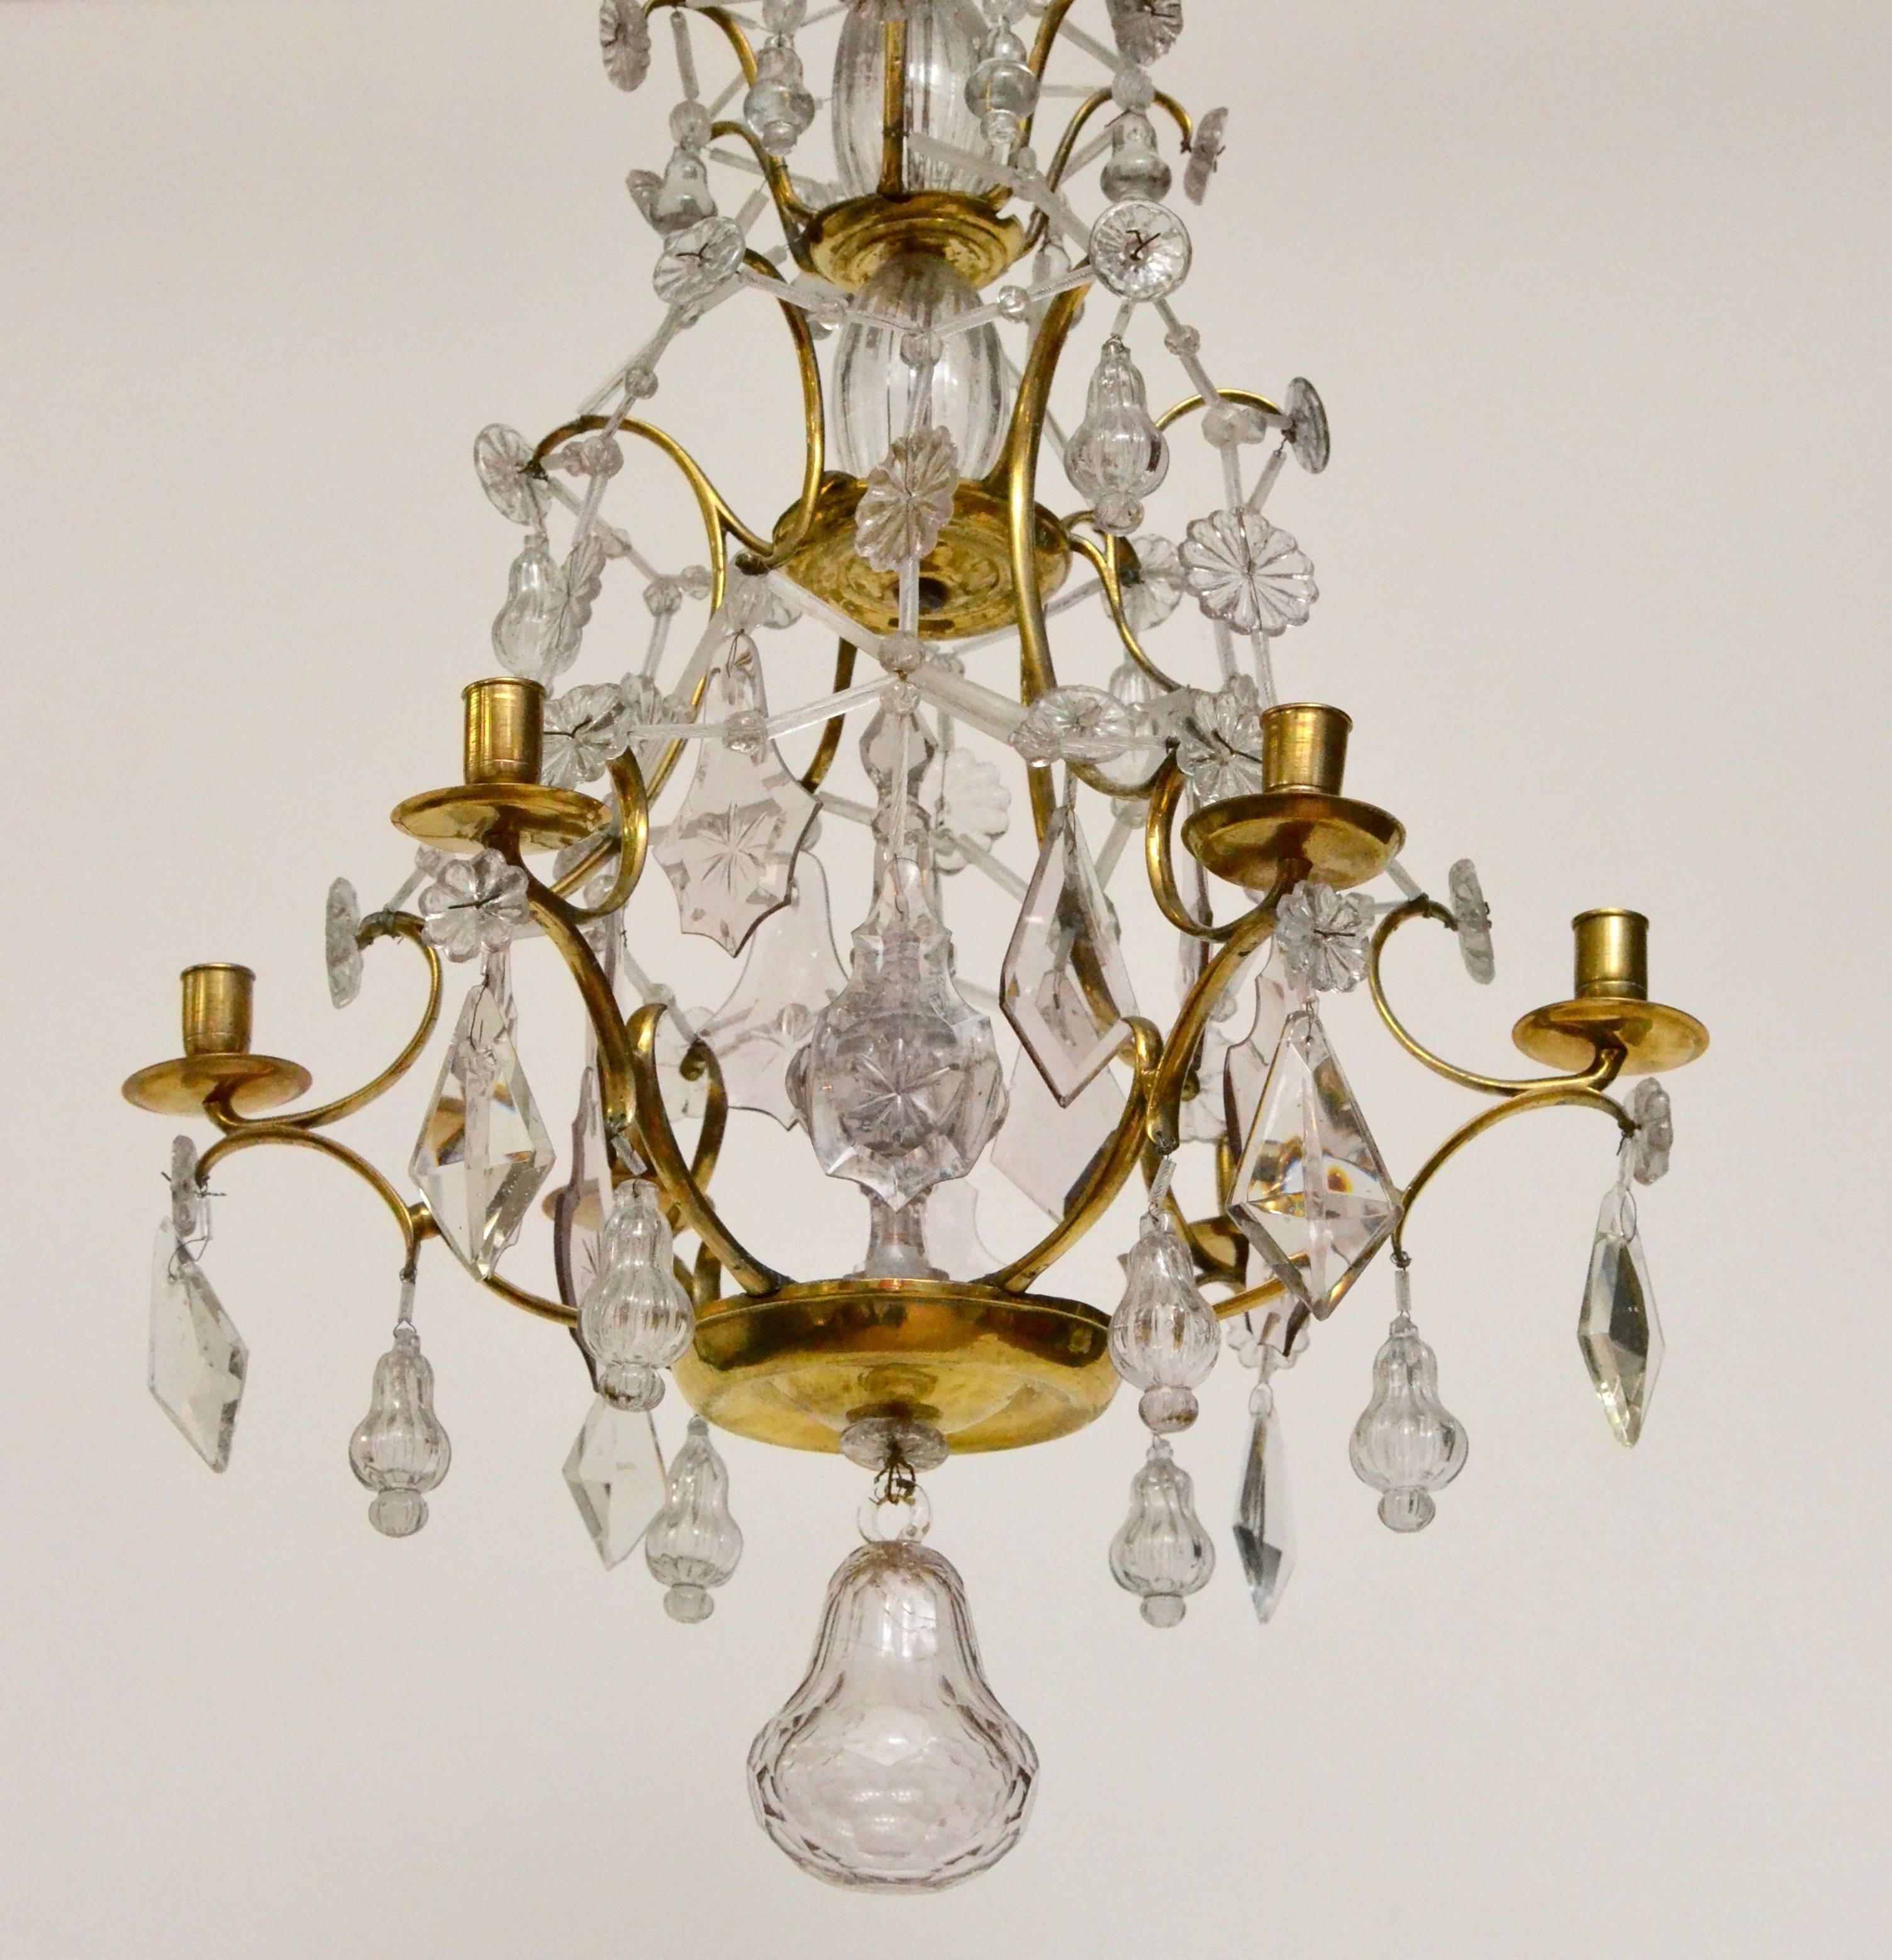 A Swedish Rococo chandelier from the second half of the 18th century.